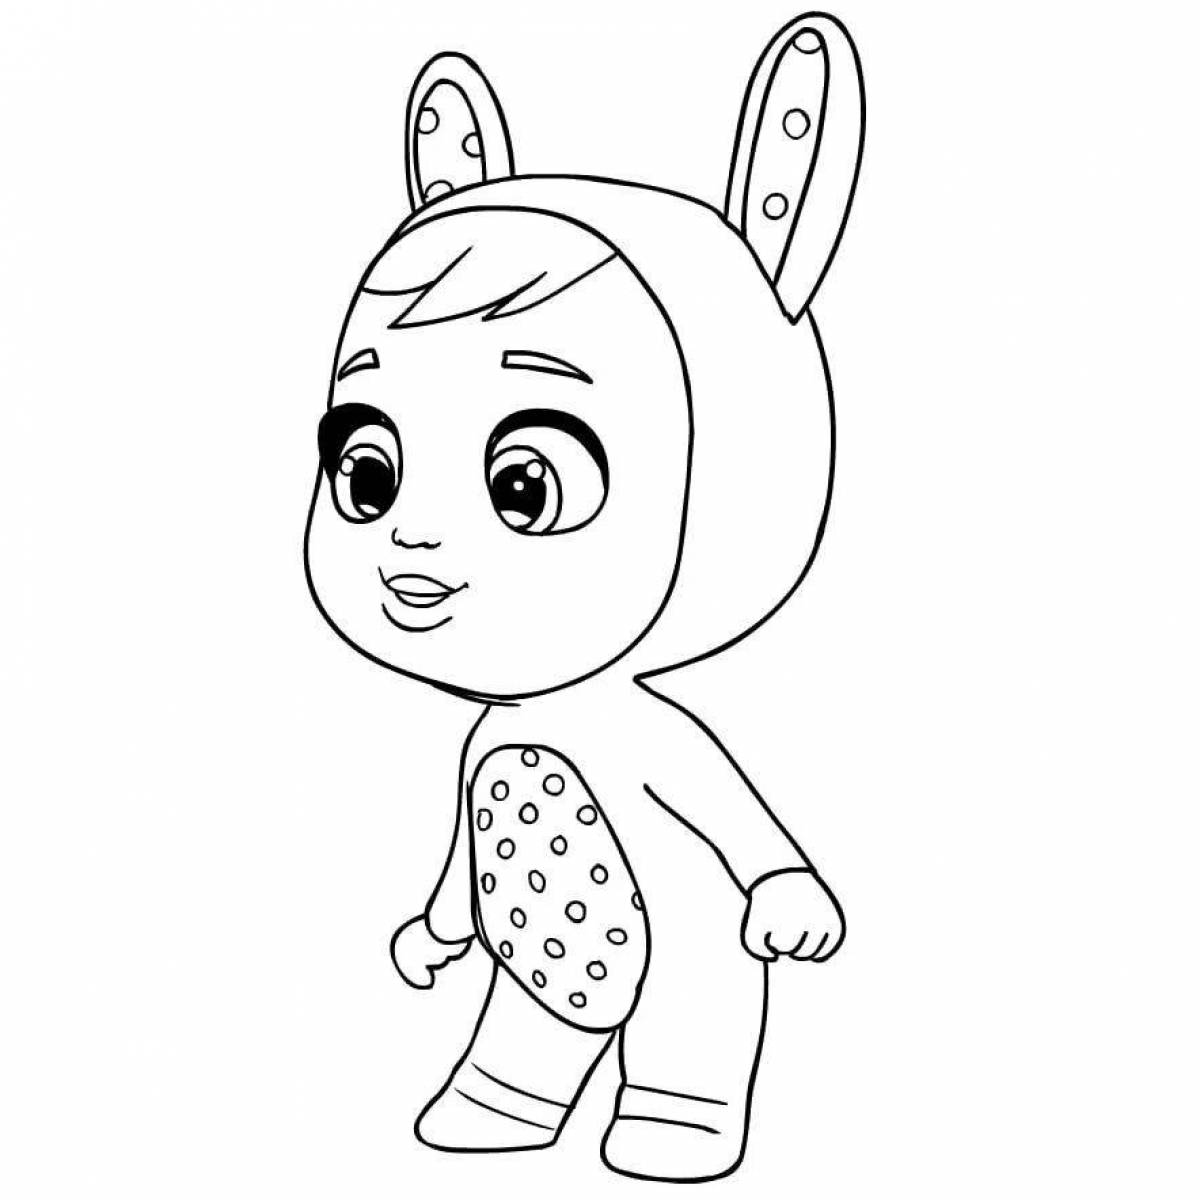 Awesome crybaby coloring page